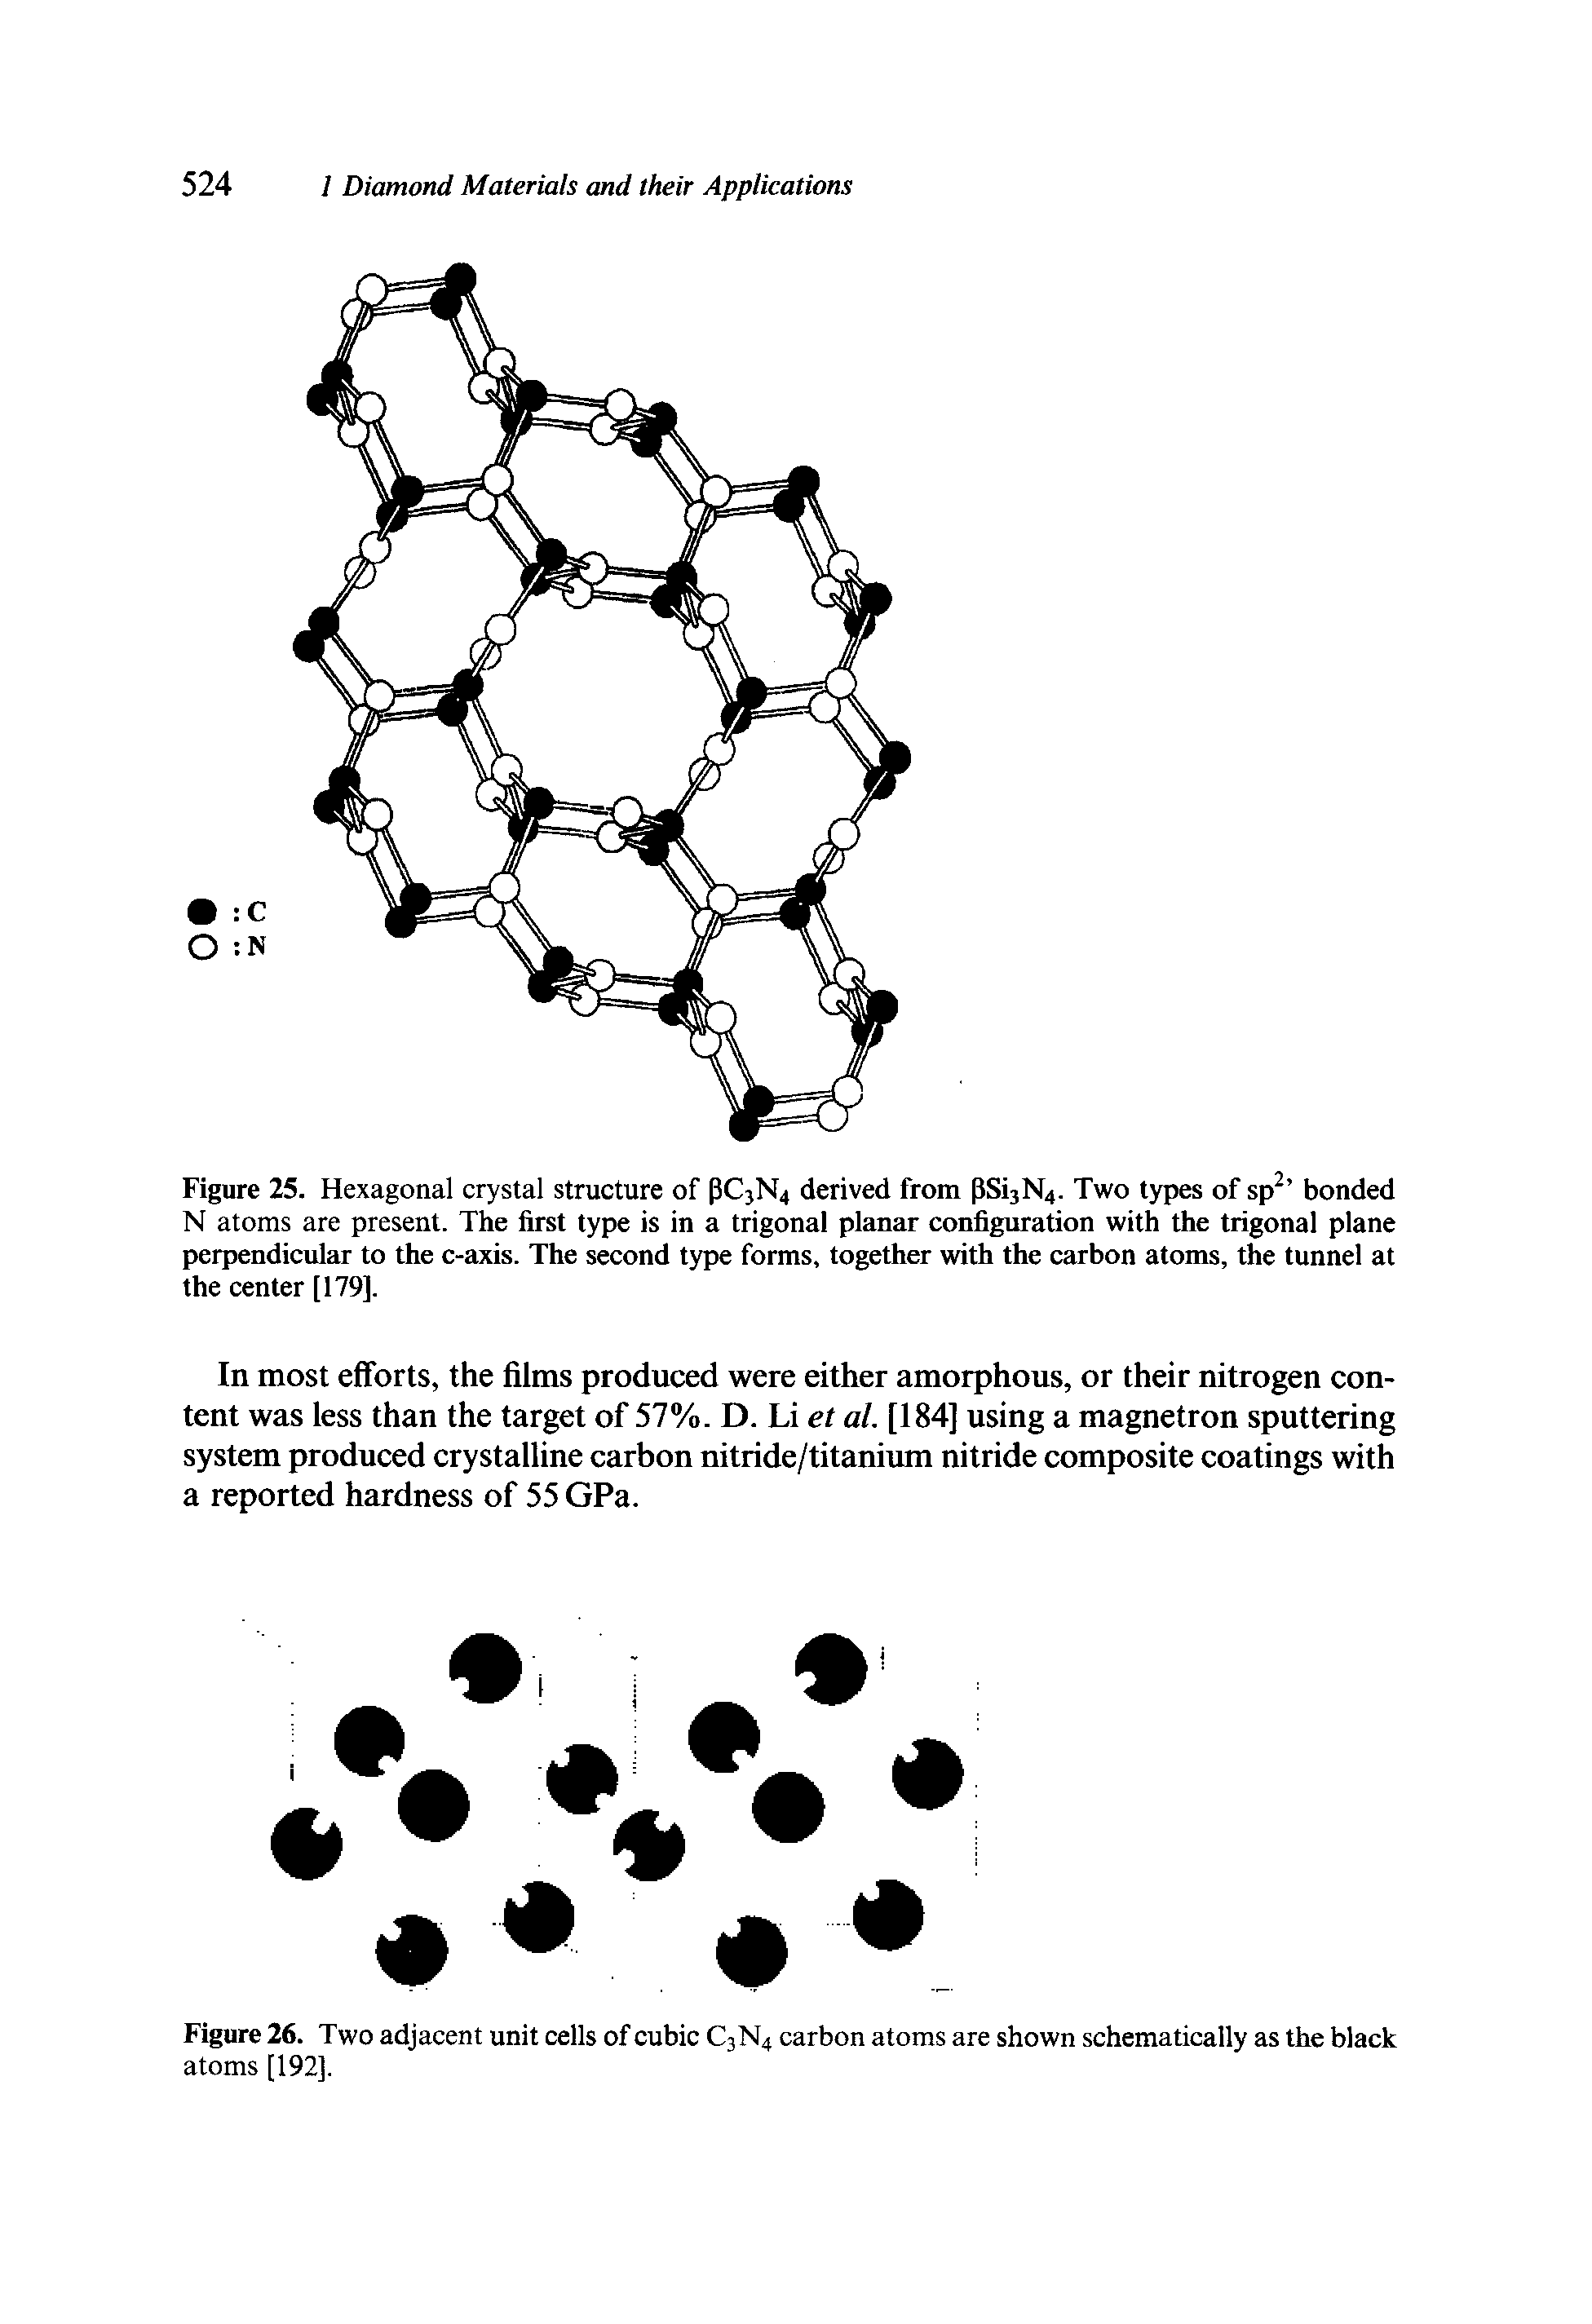 Figure 25. Hexagonal crystal structure of PC3N4 derived from pSi3N4- Two types of sp bonded N atoms are present. The first type is in a trigonal planar configuration with the trigonal plane perpendicular to the c-axis. The second type forms, together with the carbon atoms, the tunnel at the center [179].